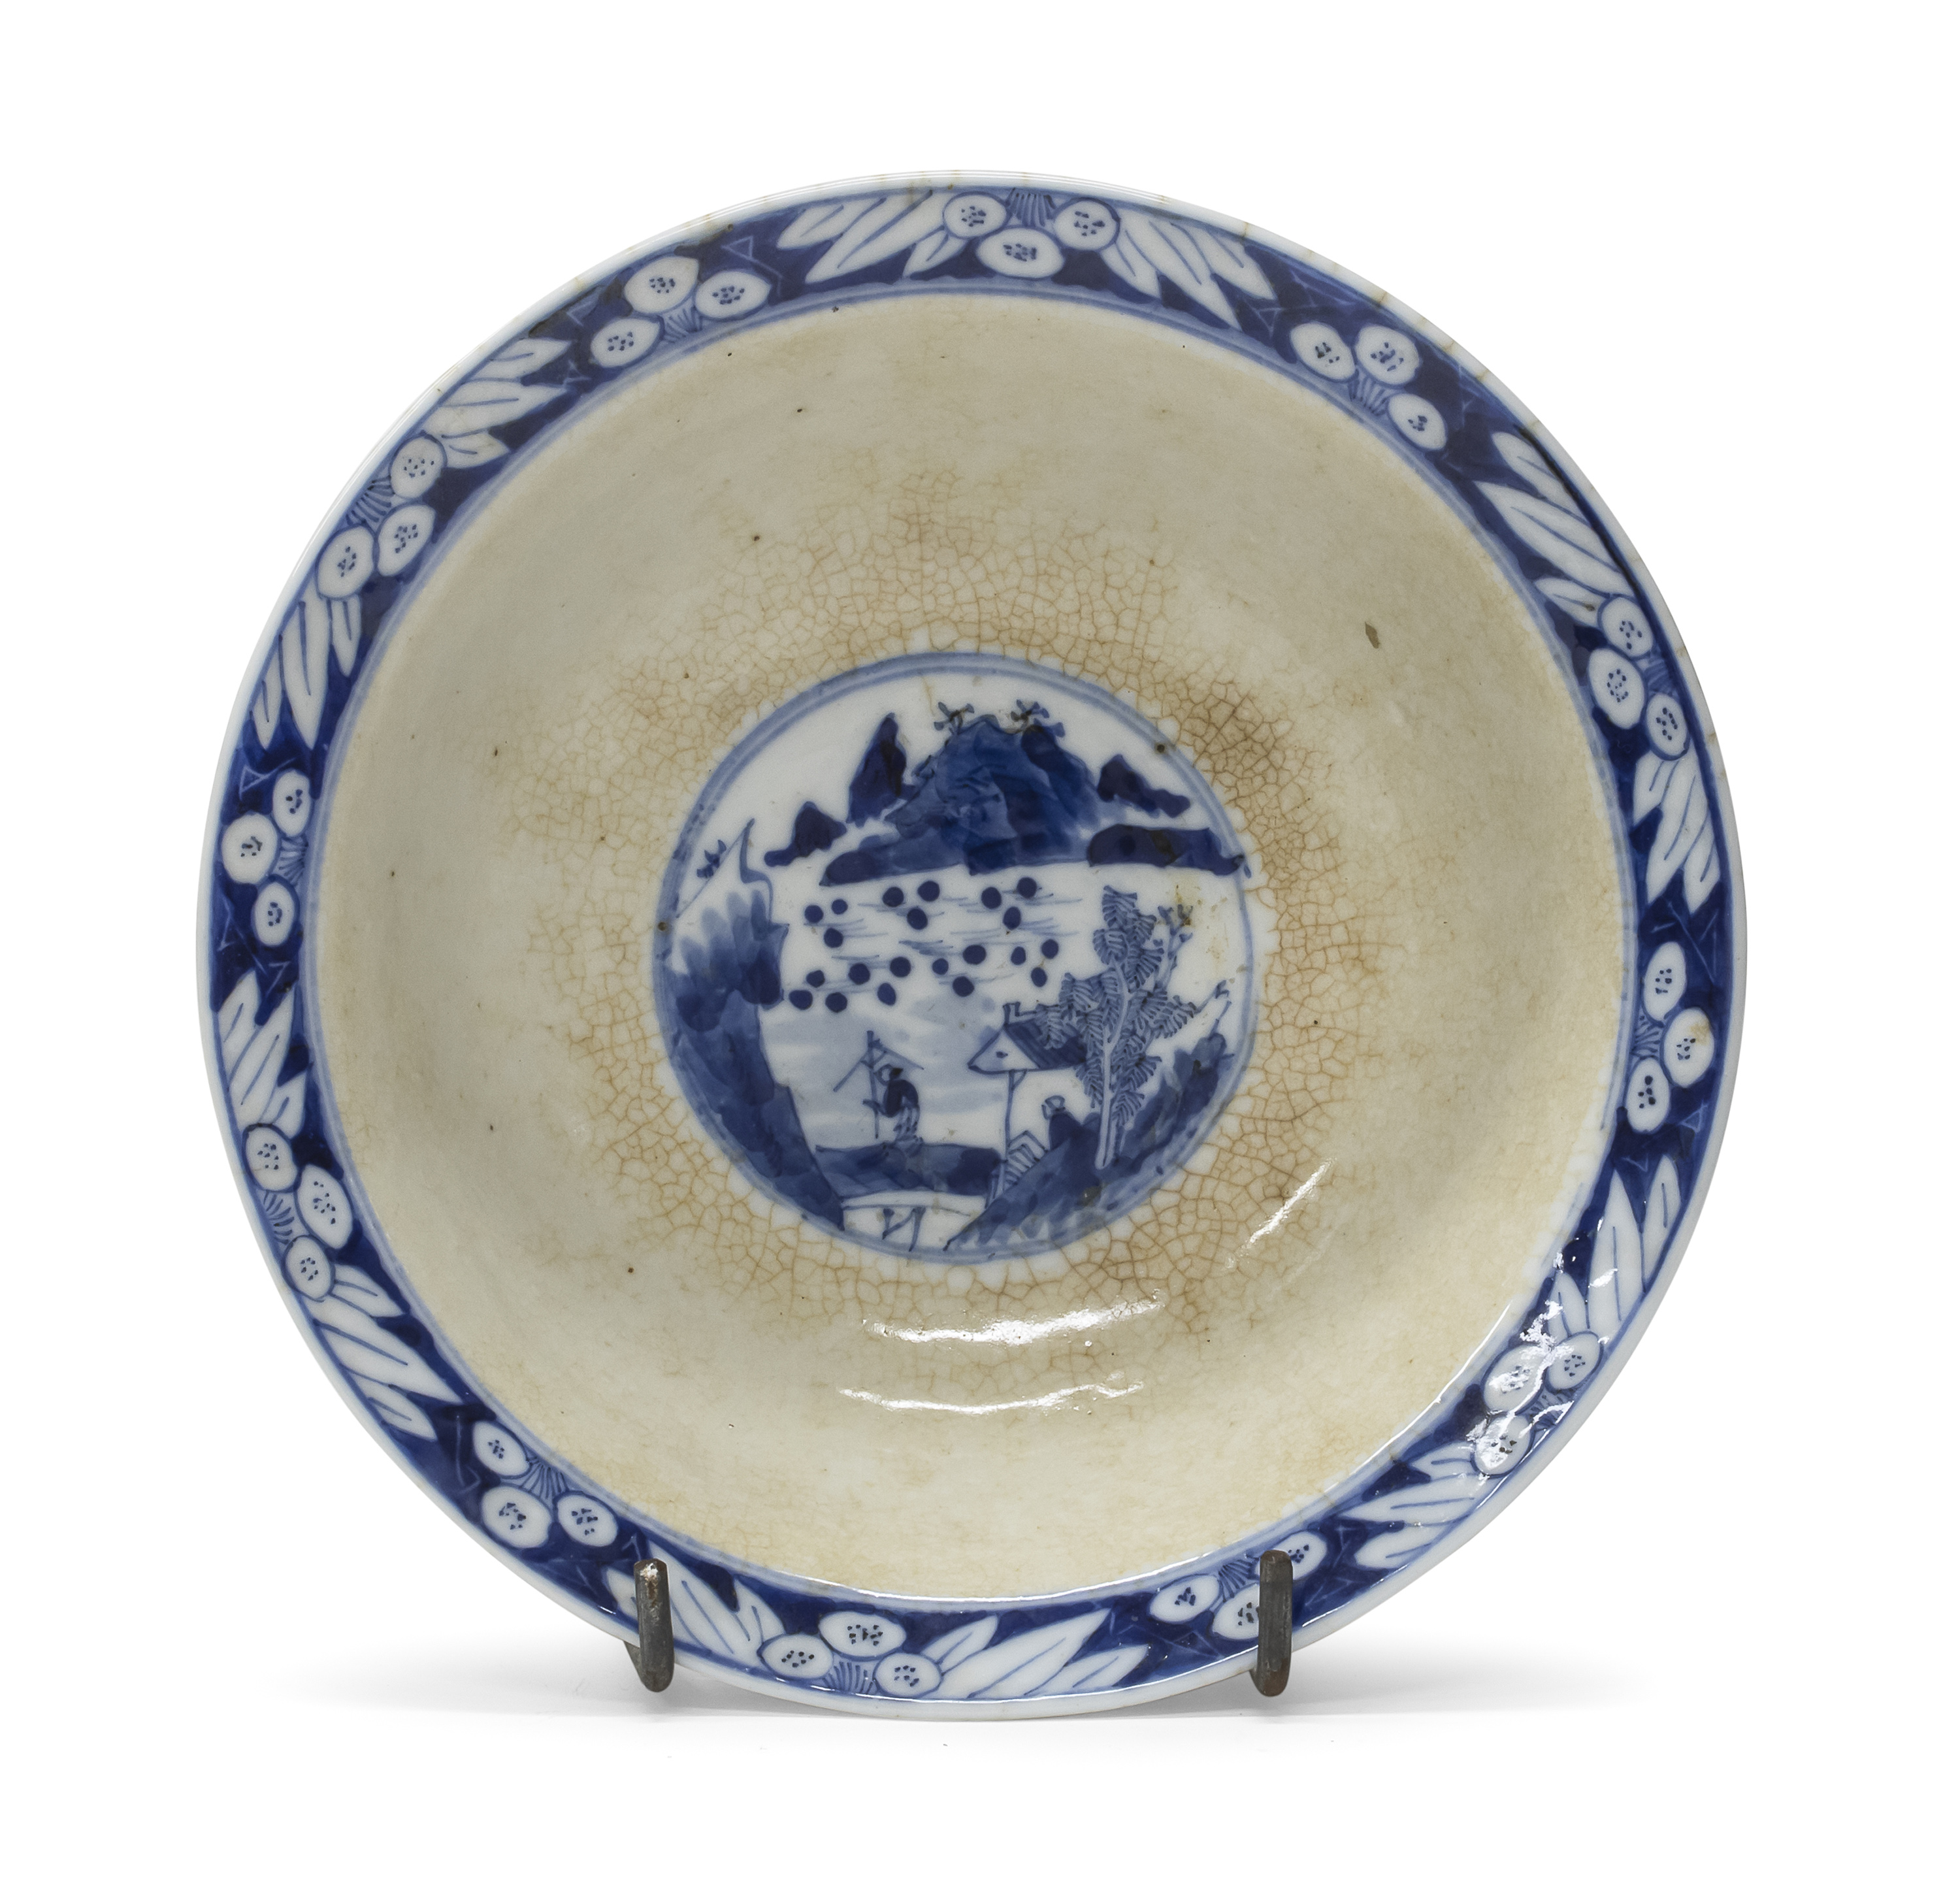 A CHINESE WHITE AND BLUE PORCELAIN BOWL. EARLY 20TH CENTURY. - Image 2 of 3